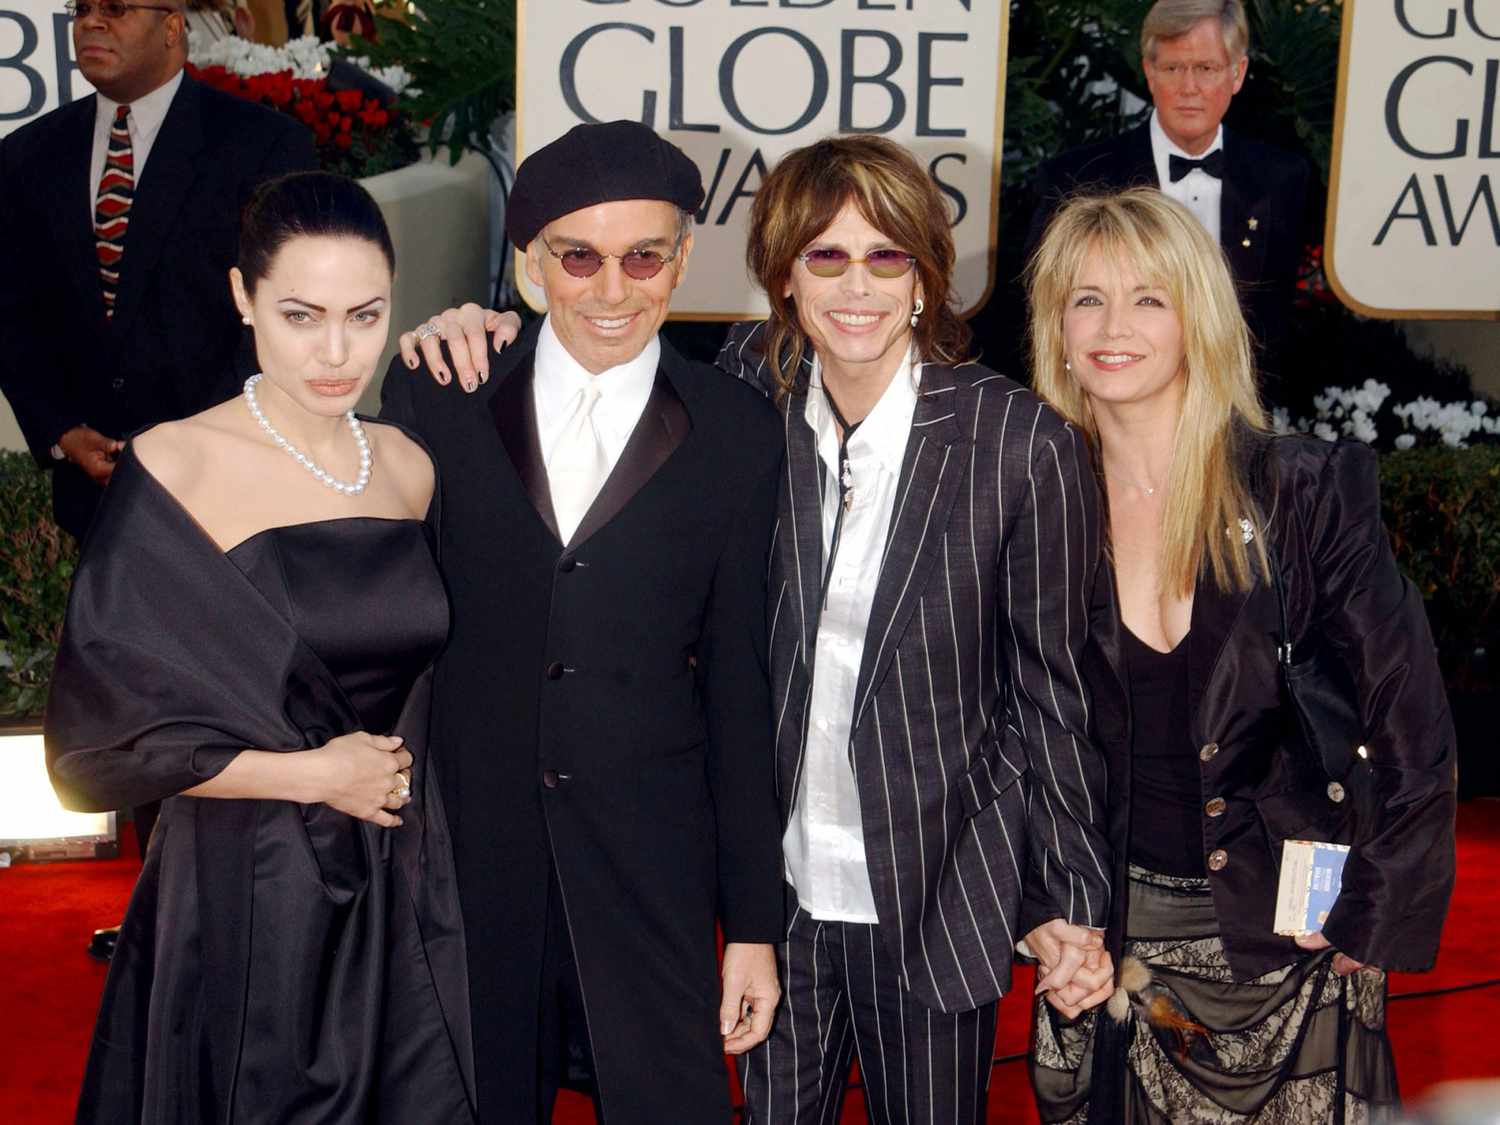 Angelina Jolie, Best Actor Nominee Billy Bob Thornton (The Man Who Wasn't There, Bandits), Steven Tyler, and Teresa Tyler